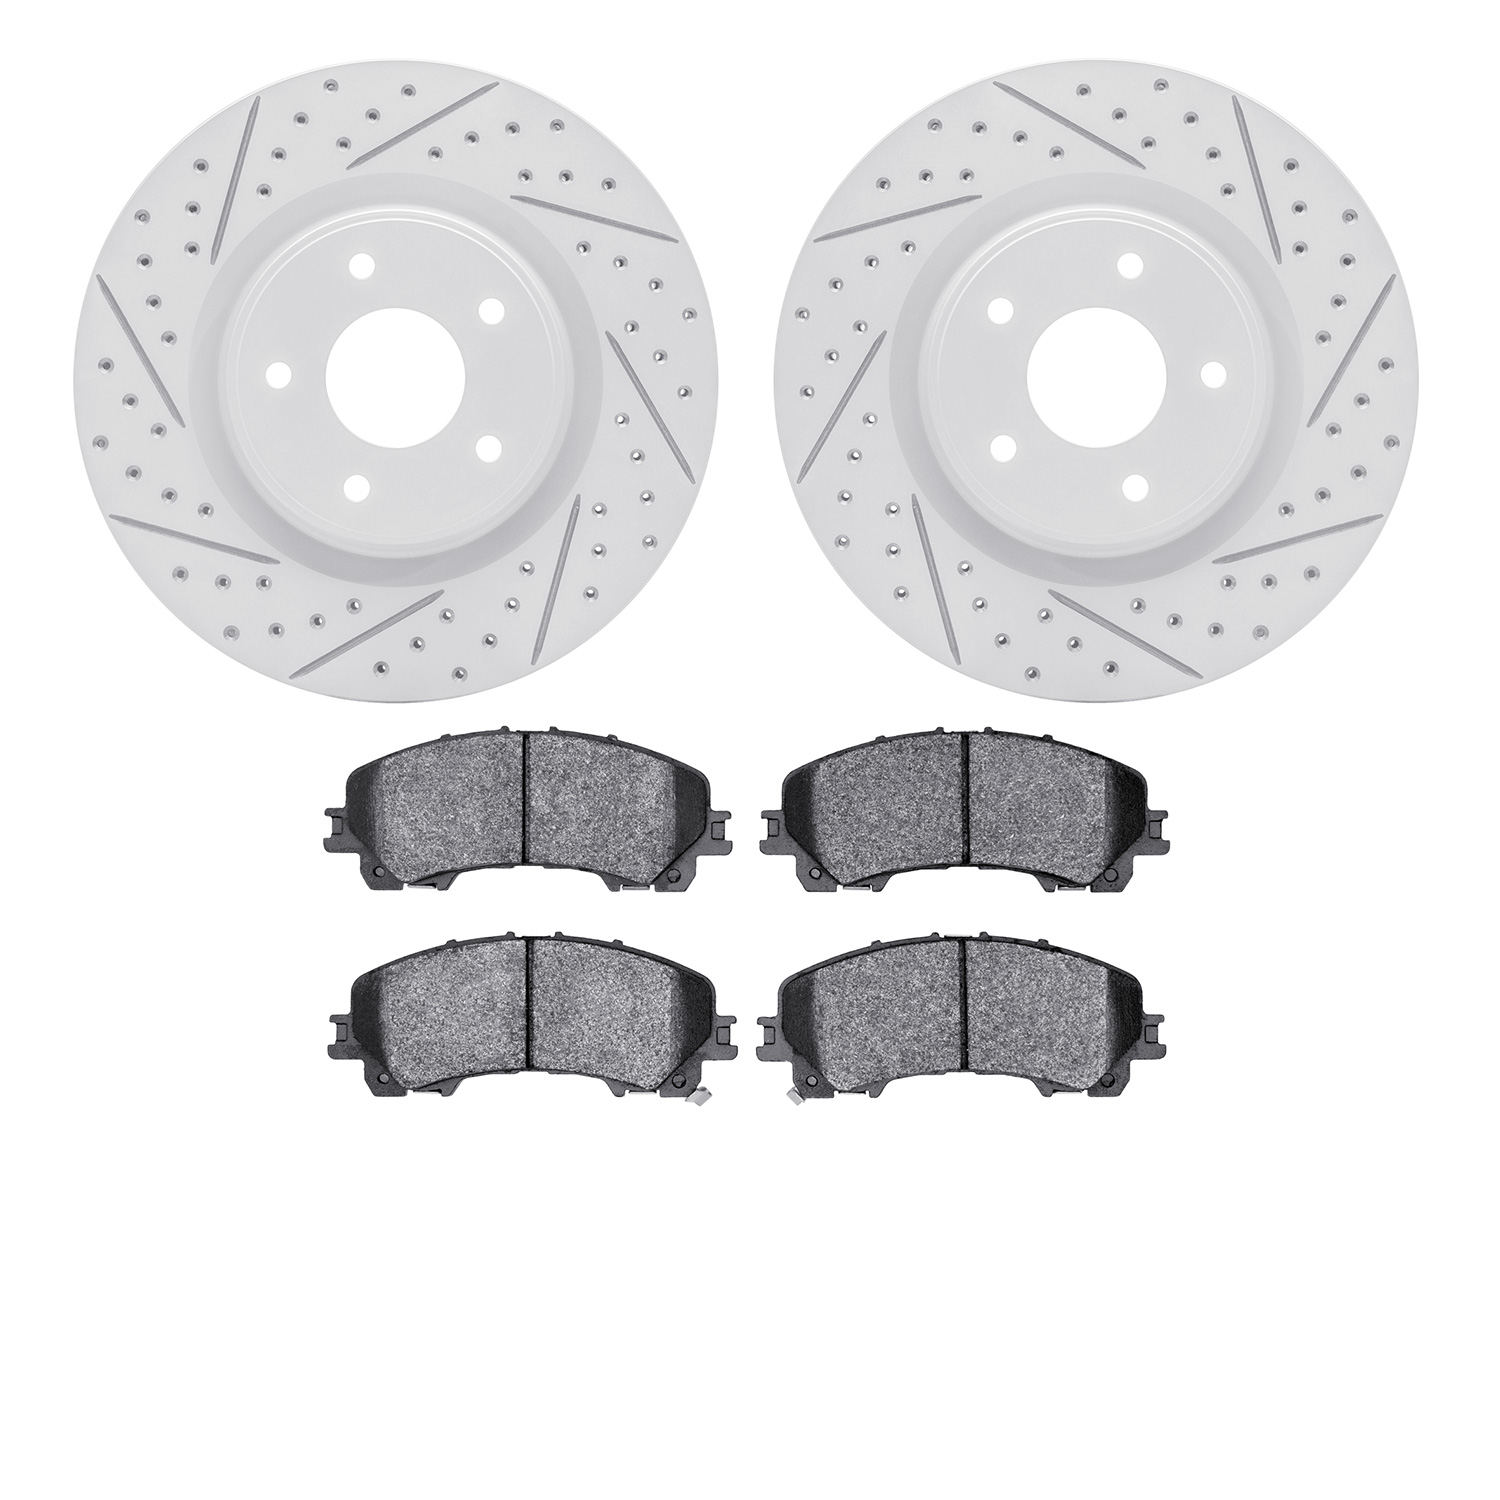 2502-67129 Geoperformance Drilled/Slotted Rotors w/5000 Advanced Brake Pads Kit, Fits Select Infiniti/Nissan, Position: Front